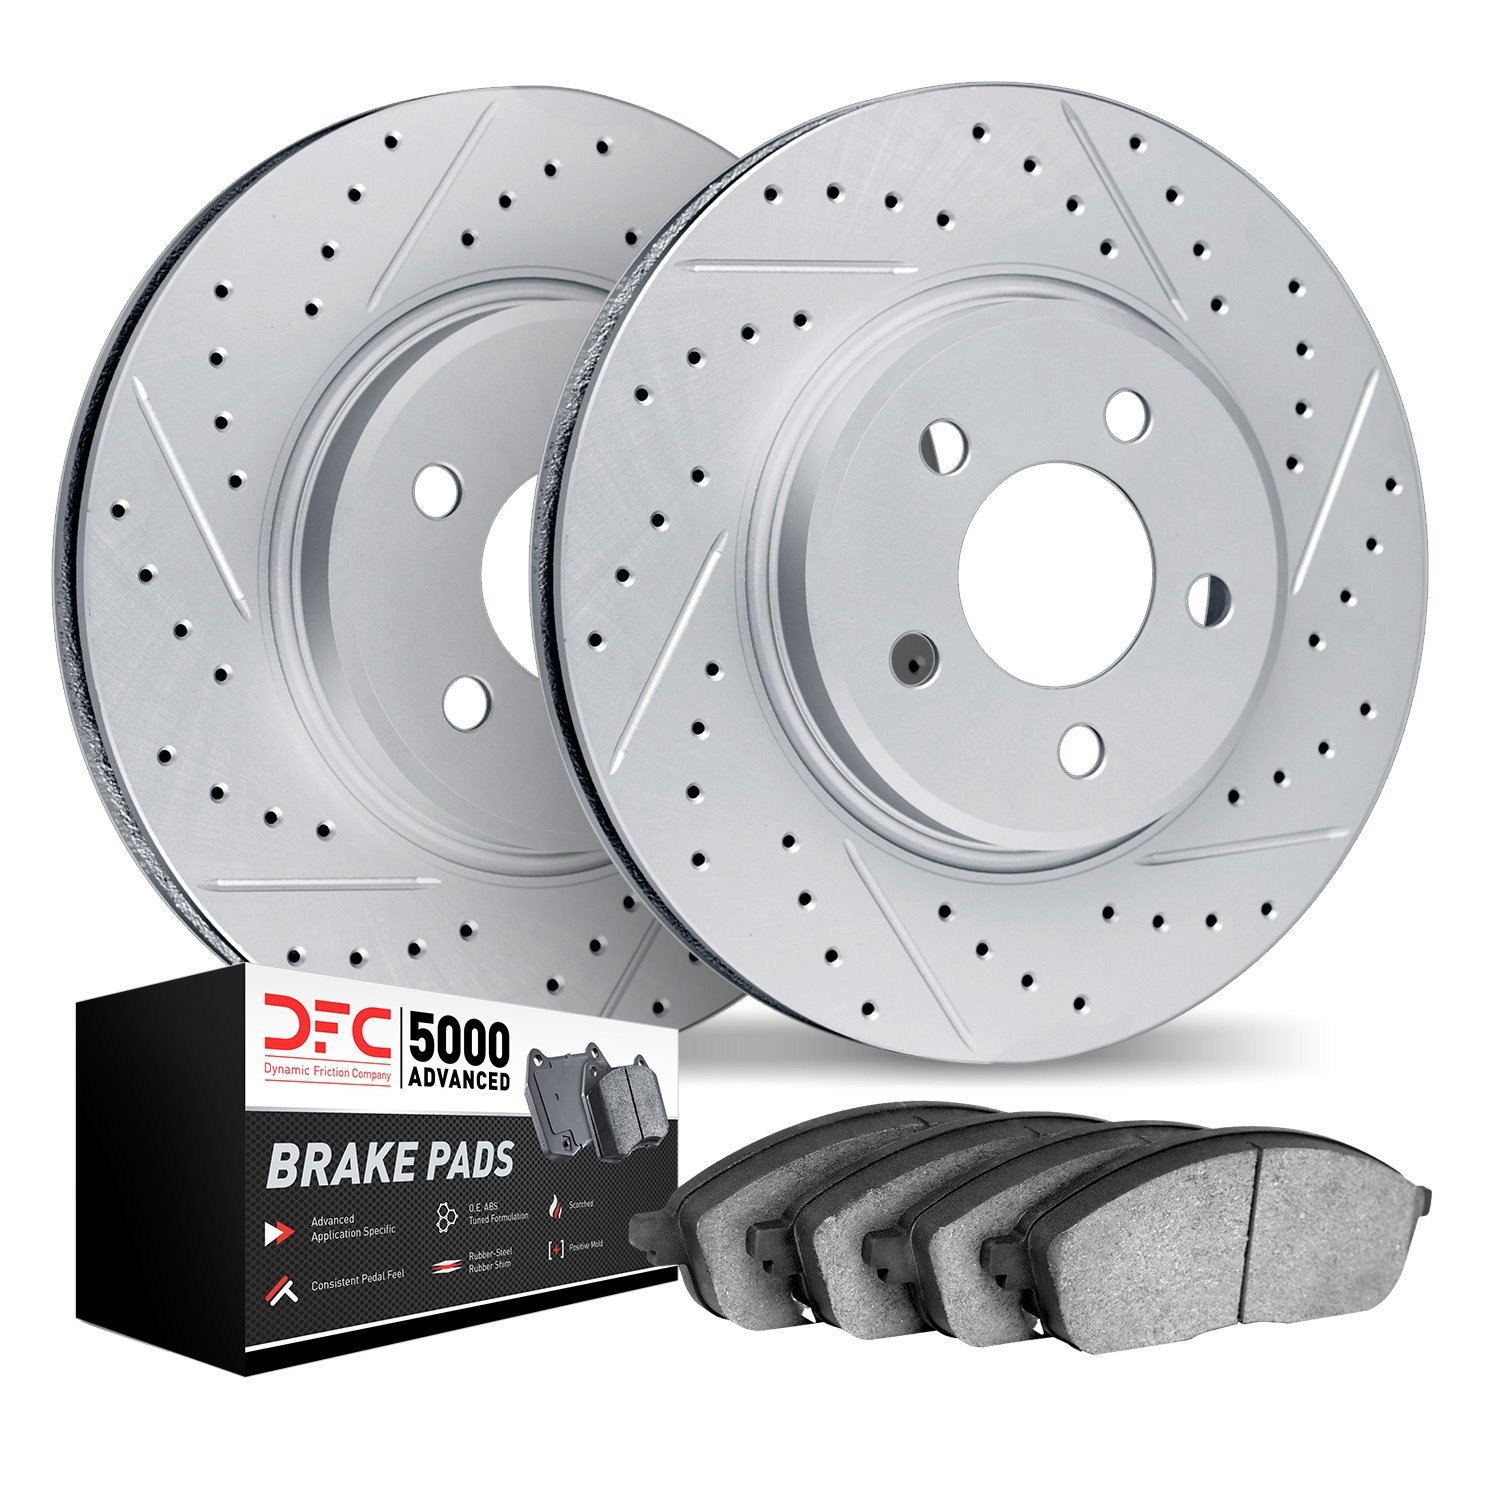 2502-02010 Geoperformance Drilled/Slotted Rotors w/5000 Advanced Brake Pads Kit, 1977-1988 Porsche, Position: Rear